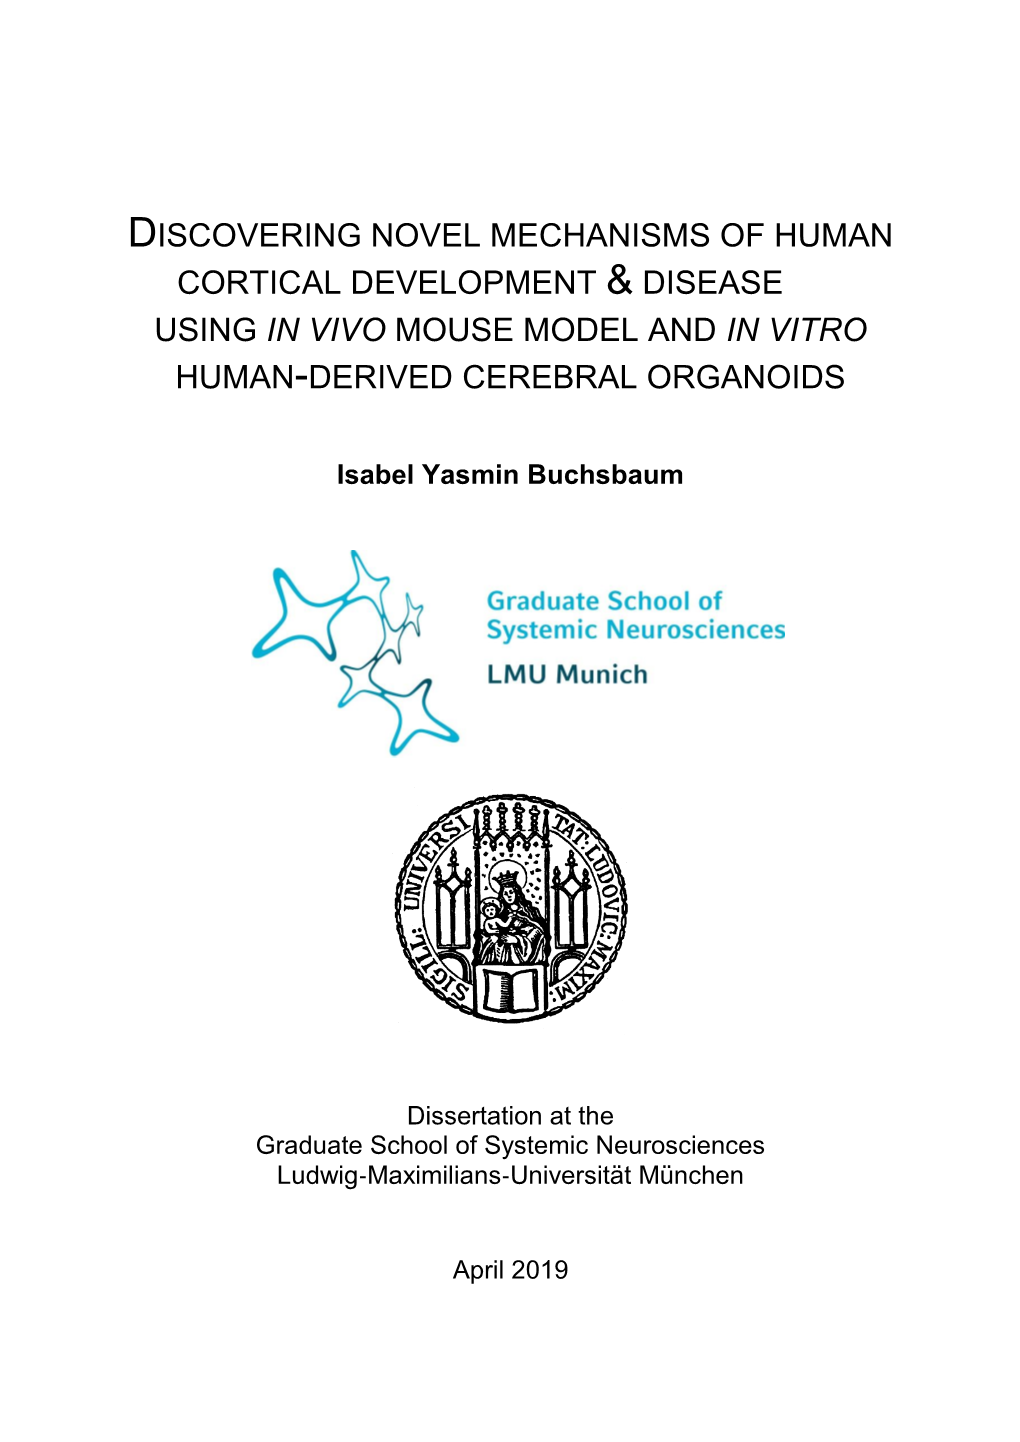 Discovering Novel Mechanisms of Human Cortical Development & Disease Using in Vivo Mouse Model and in Vitro Human-Derived Cerebral Organoids